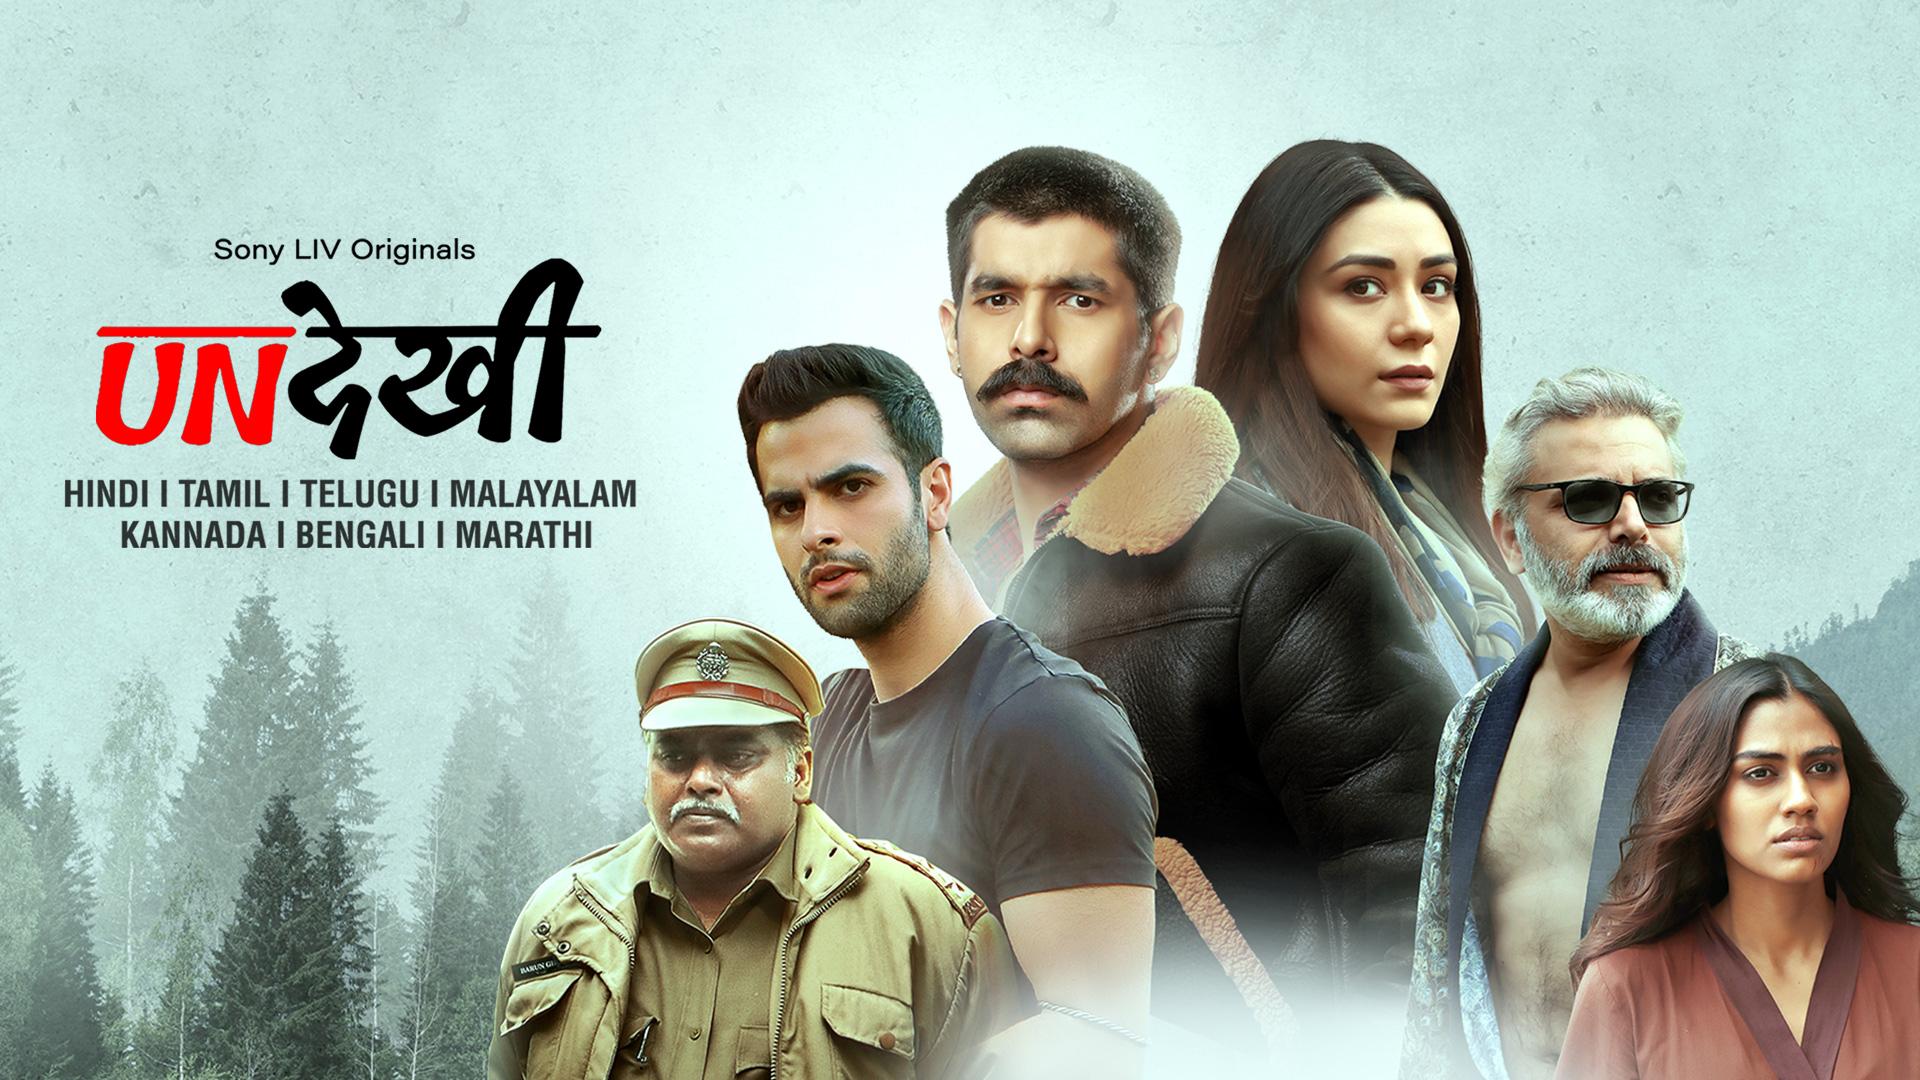 Undekhi season 3 (Streaming on SonyLIV) - May 10Join the Atwal family in the shadowy realms of crime and dominance in 